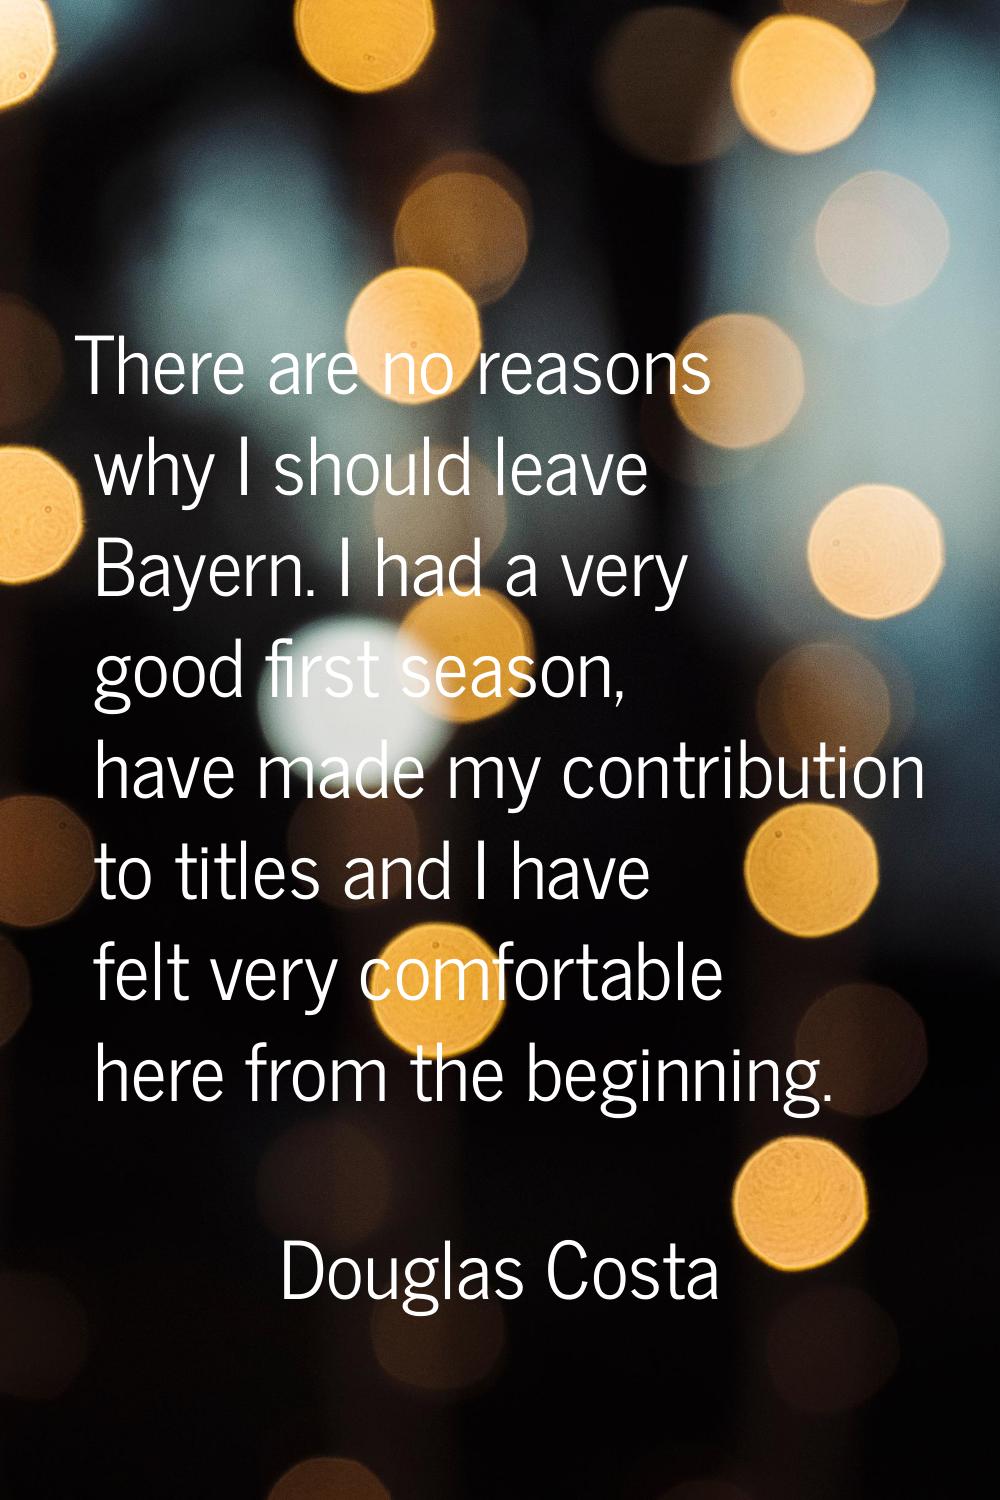 There are no reasons why I should leave Bayern. I had a very good first season, have made my contri